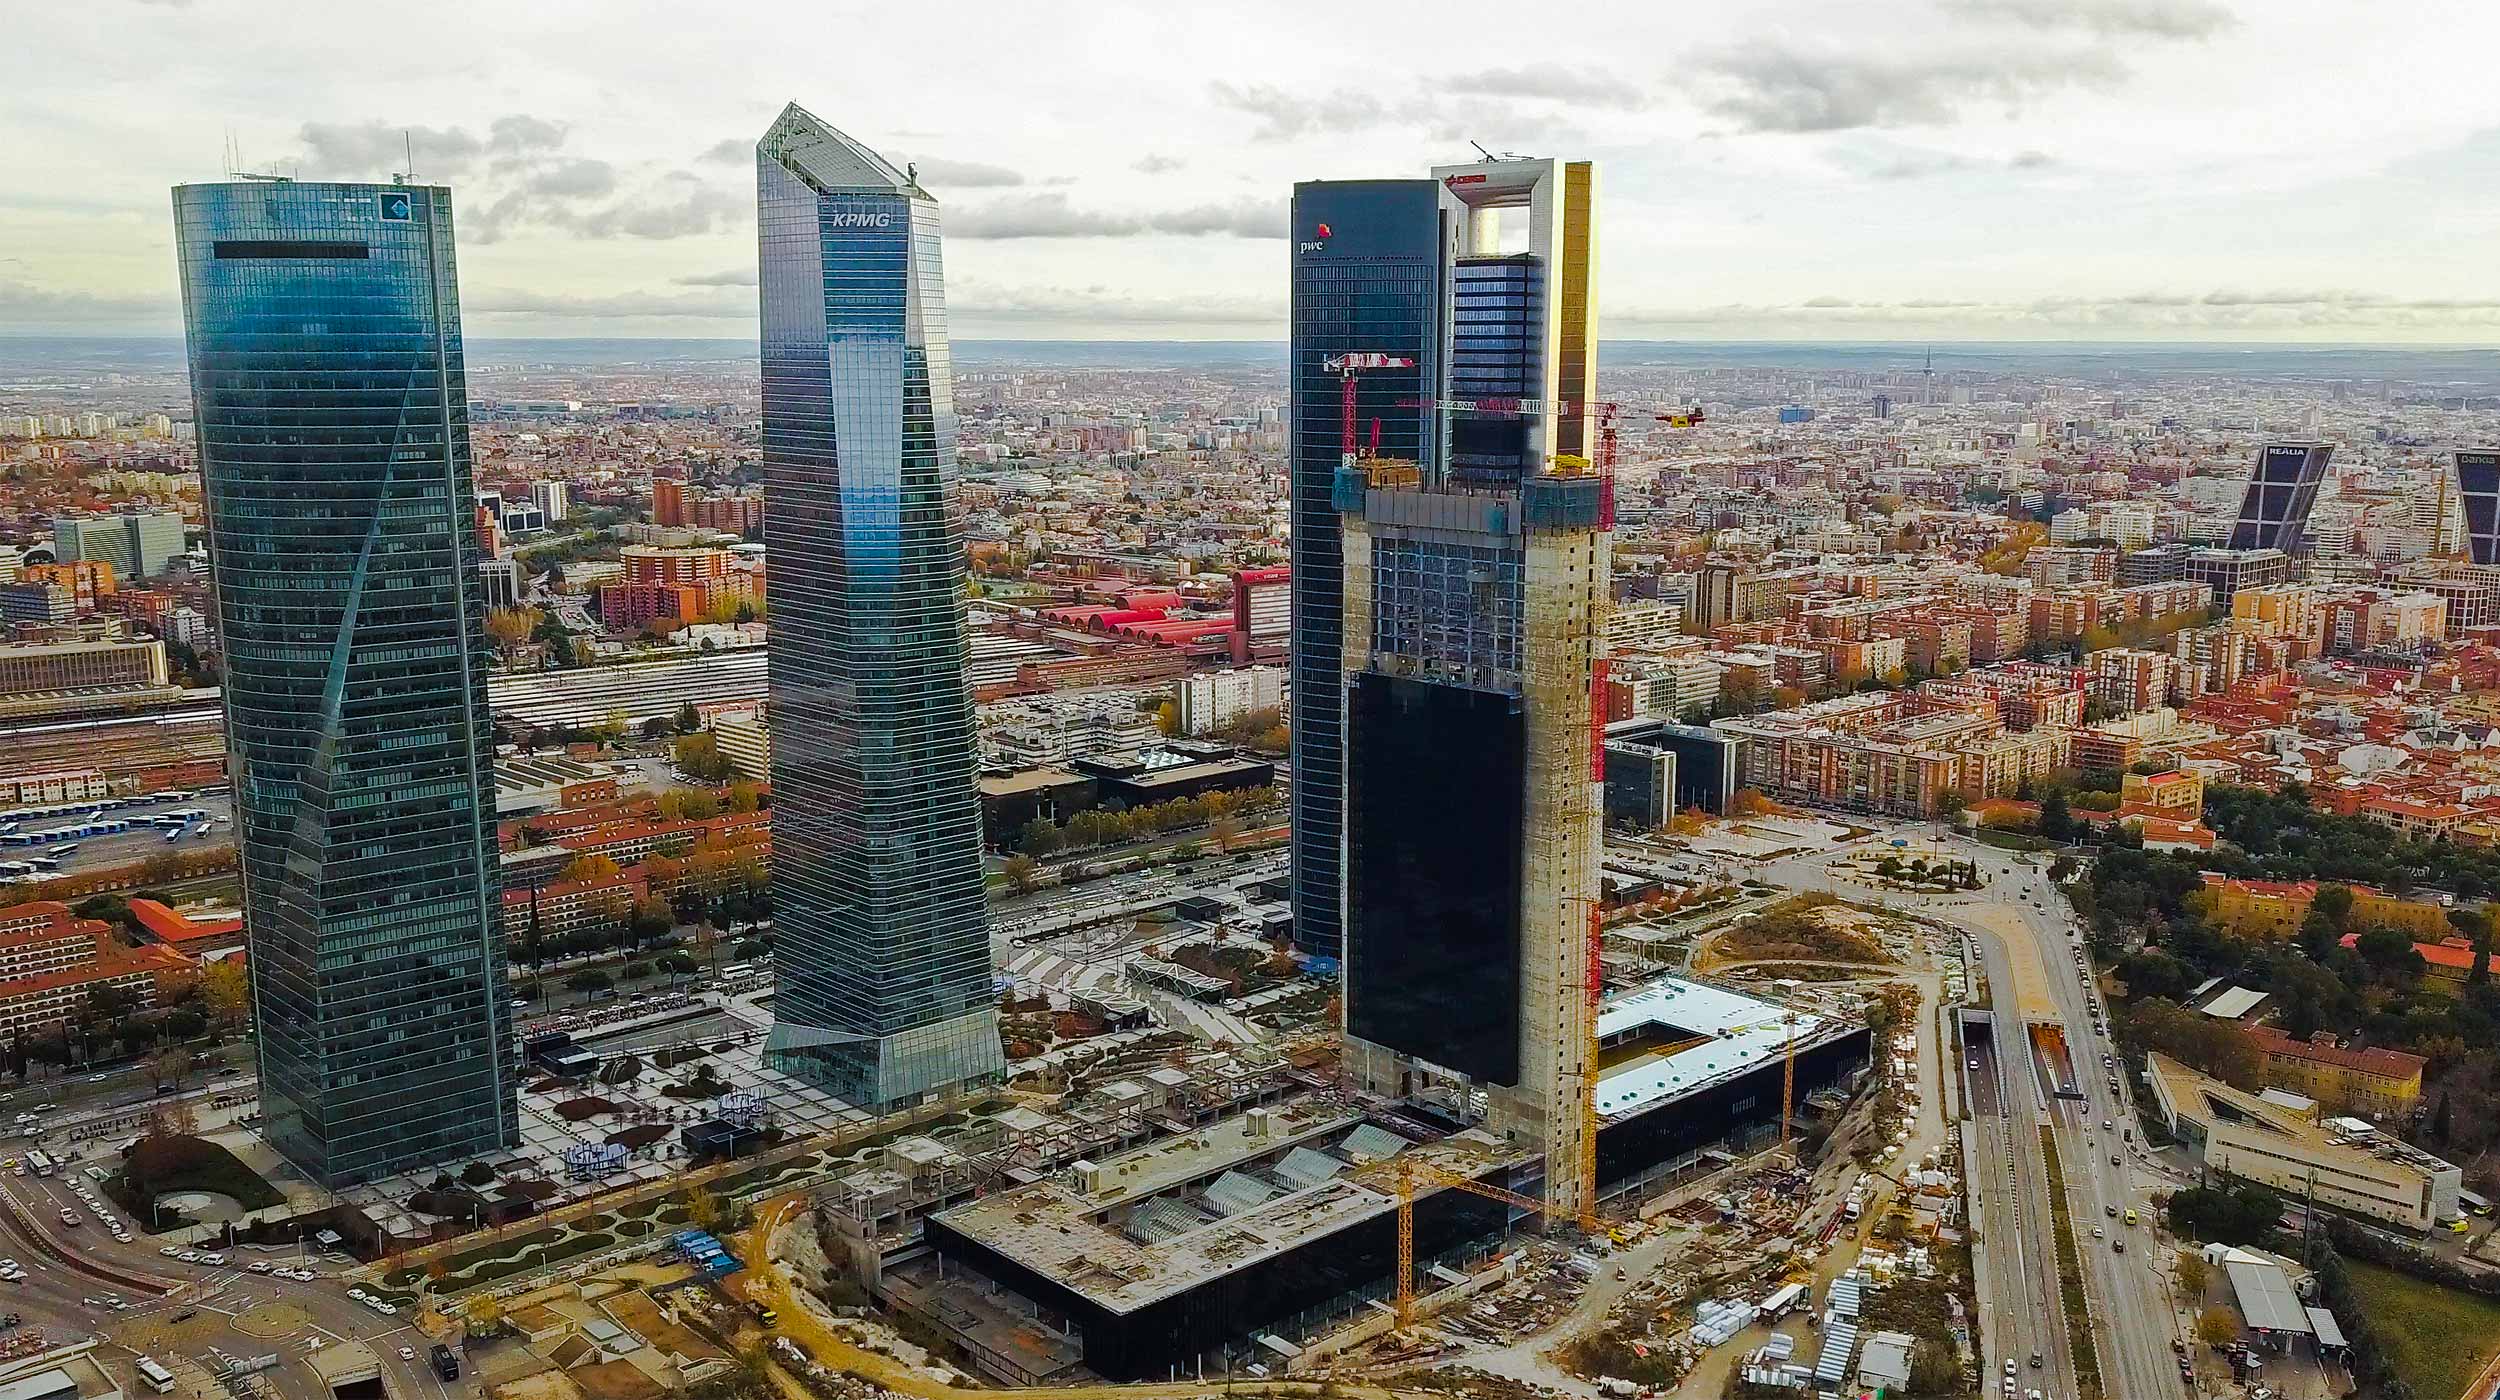 Caleido will join Madrid’s skyline as the fifth skyscraper in the 'Cuatro Torres Business Area'.